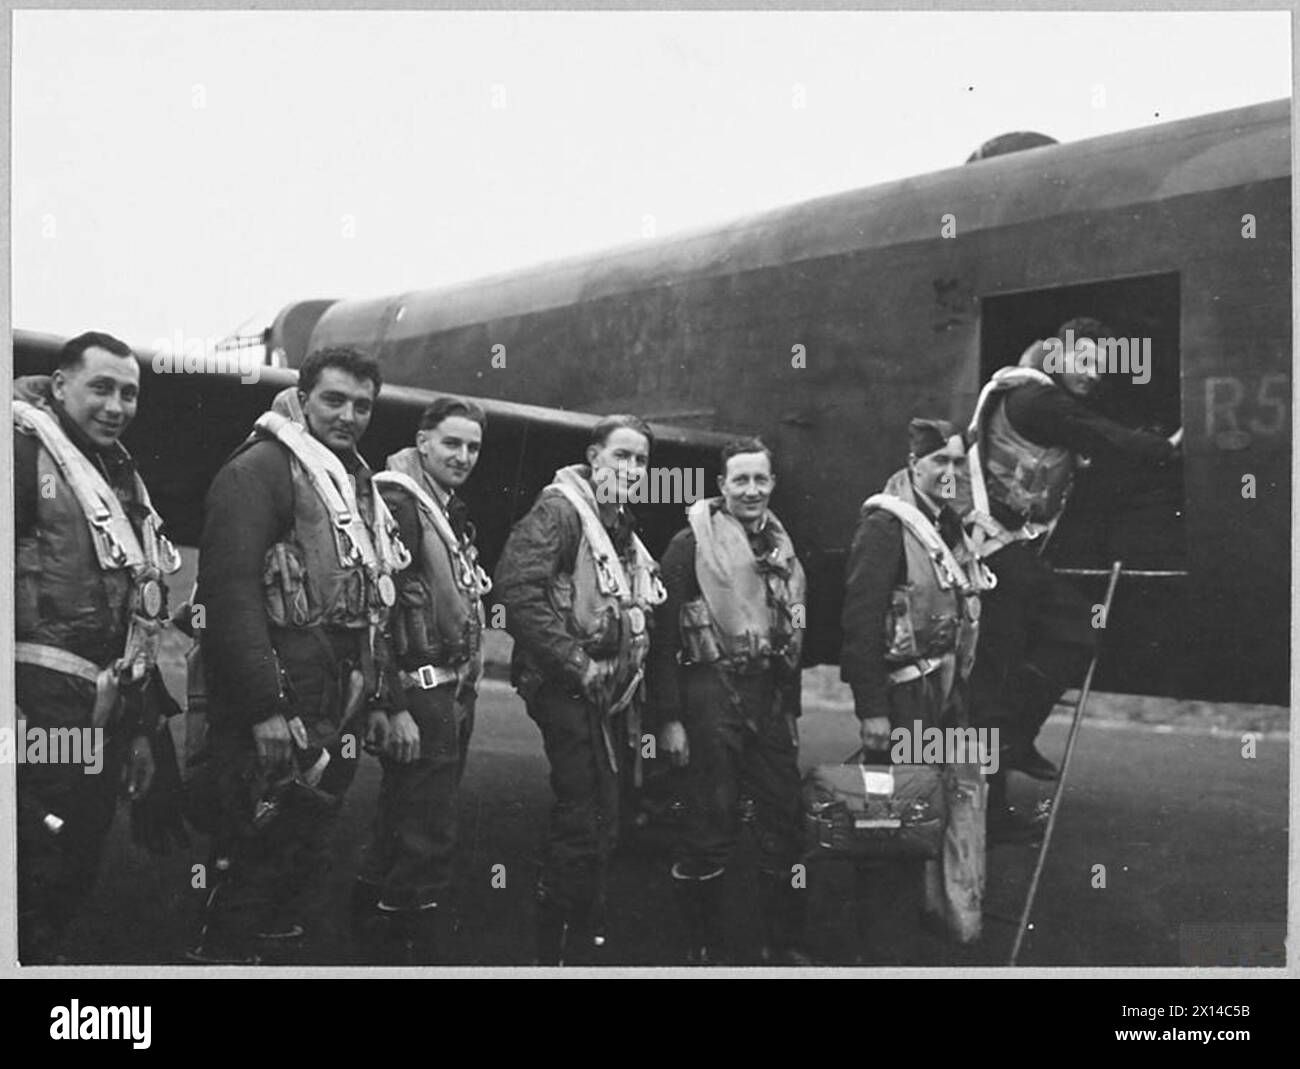 'S' FOR SUGAR COMPLETES ITS 100TH 'OP' - 13144 Picture (issued 1944) shows - The crew of 'S' for Sugar boarding the aircraft before the take off on the aircraft's 100th flight. They include Pilot Officer T.N. Scholefield of Australia, Flying Officer I. Hamilton of Glasgow, Flight Sergeant F.E. Hughes of Australia, Flight Sergeant R. Hillas of Australia, Flight Sergeant K. Stewart of Australia, Sergeant J. D. Wells of Sidcup, Kent, and Sergeant R.H. Burgess of Chester Royal Air Force Stock Photo